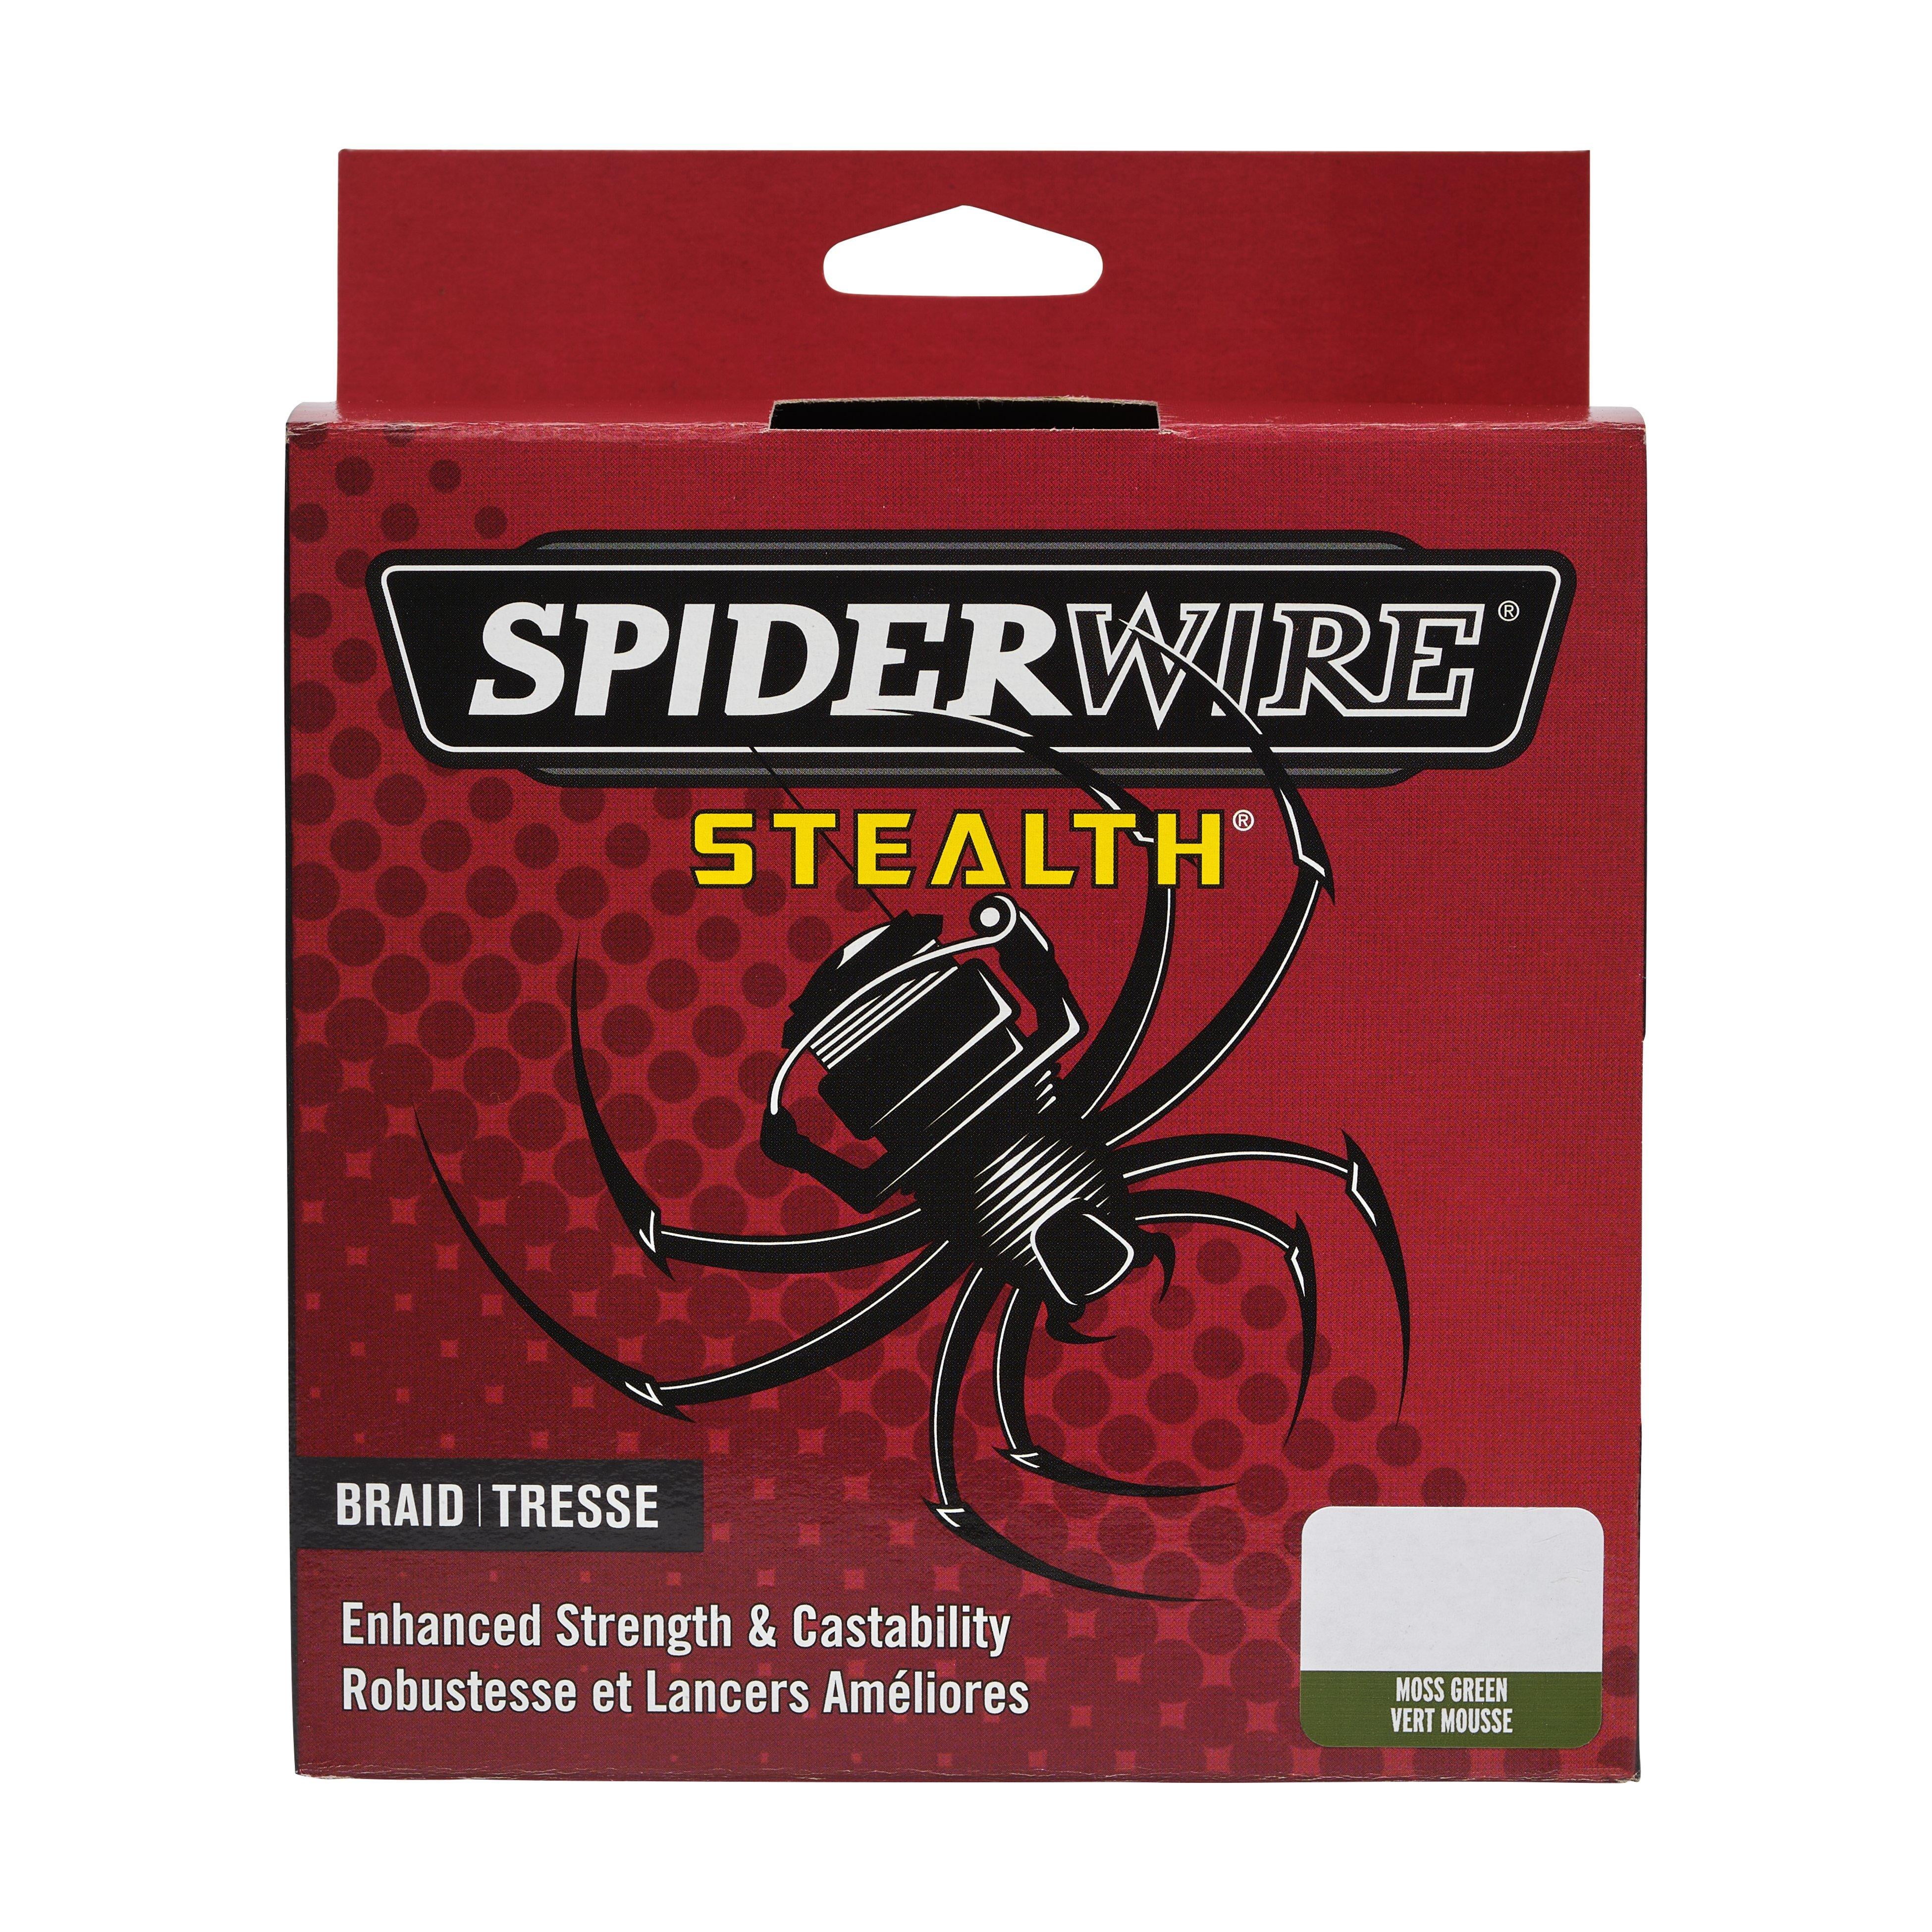 SpiderWire Stealth 50 lb Braid Fishing Line, Moss Philippines | Ubuy